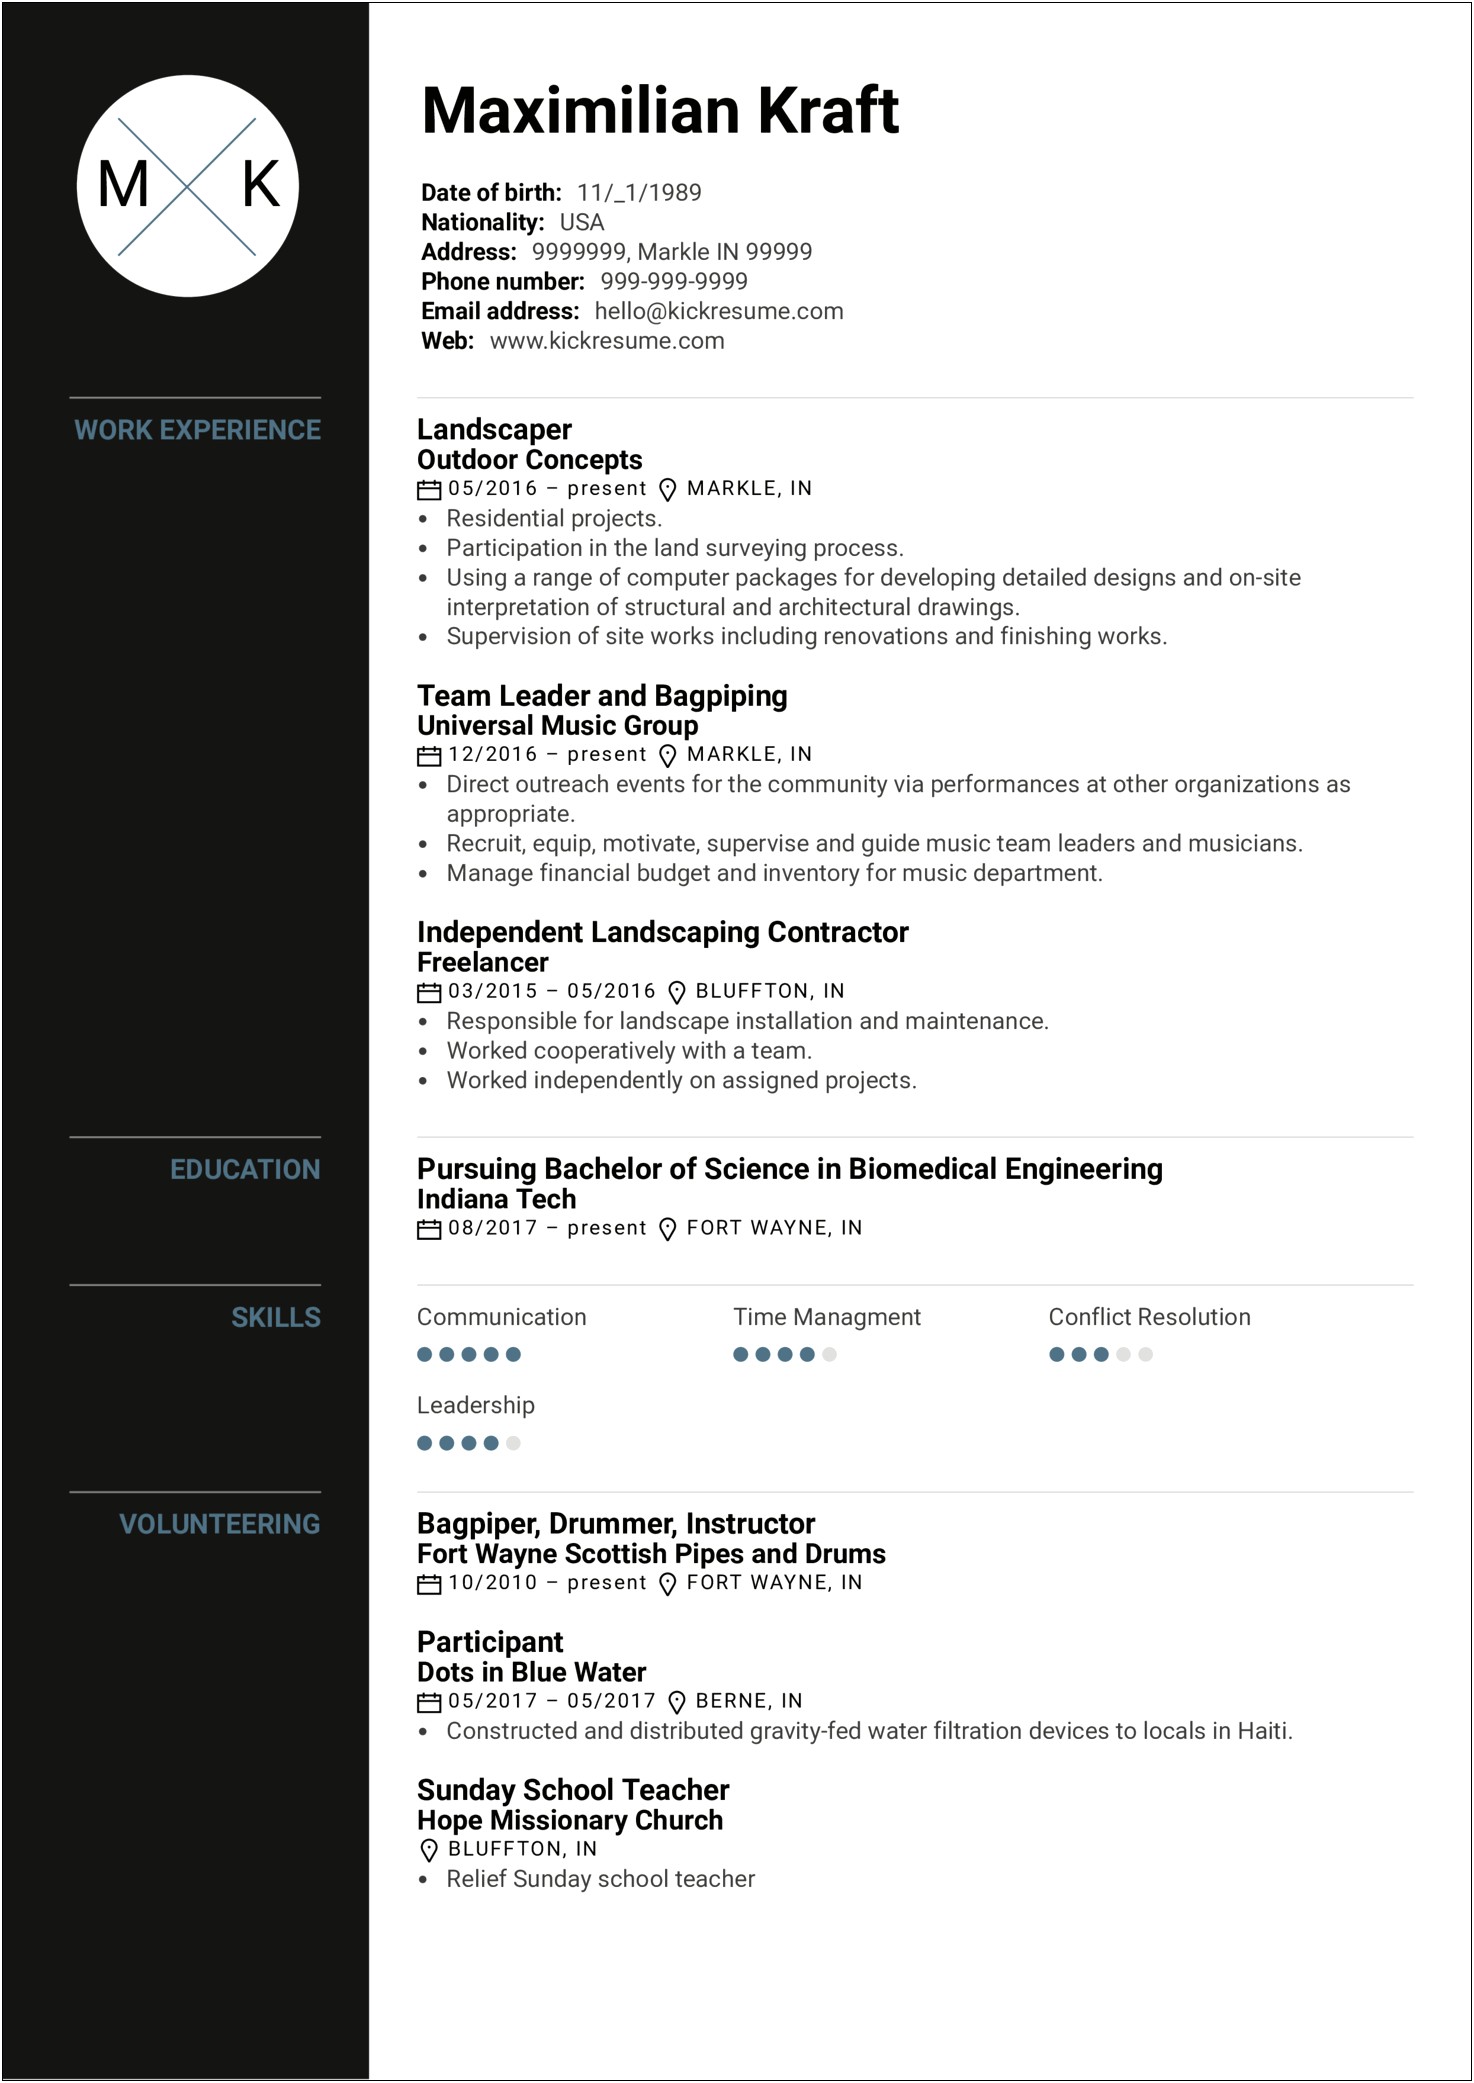 Resume Worked On A Team And Independently